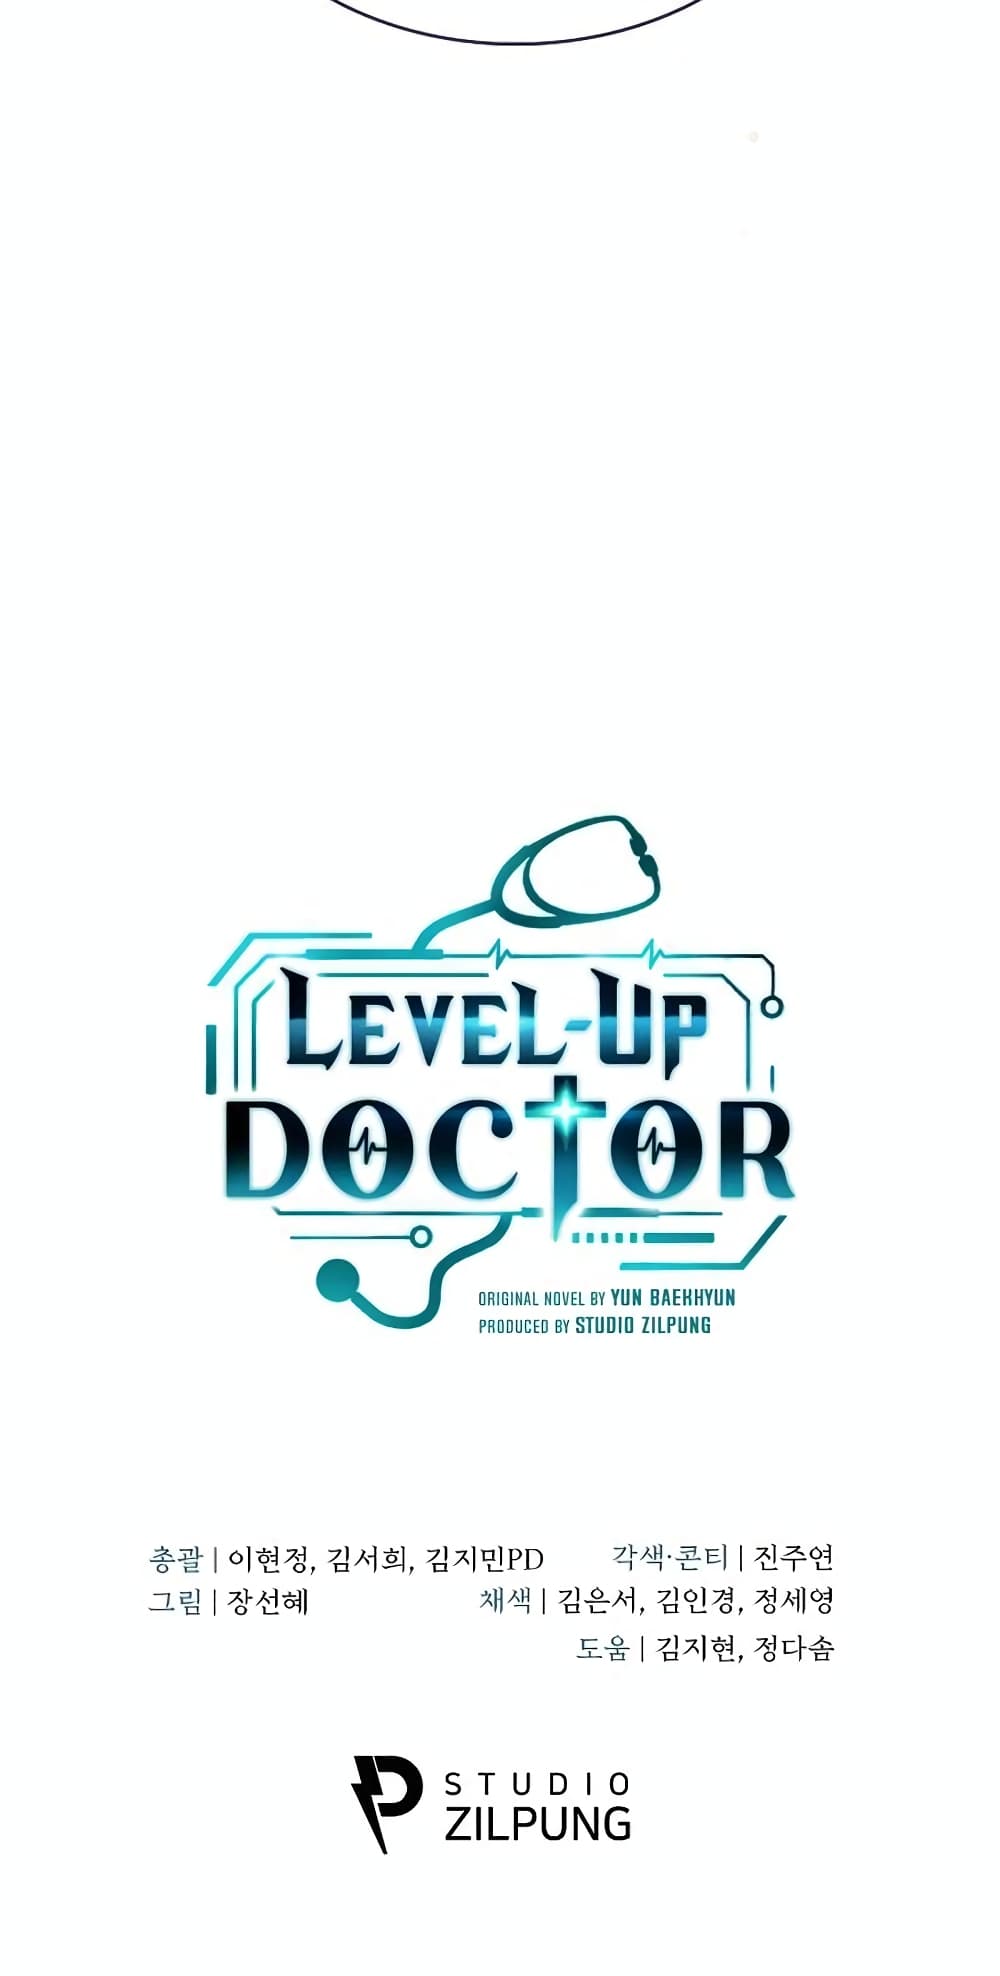 Level Up Doctor 25 (61)